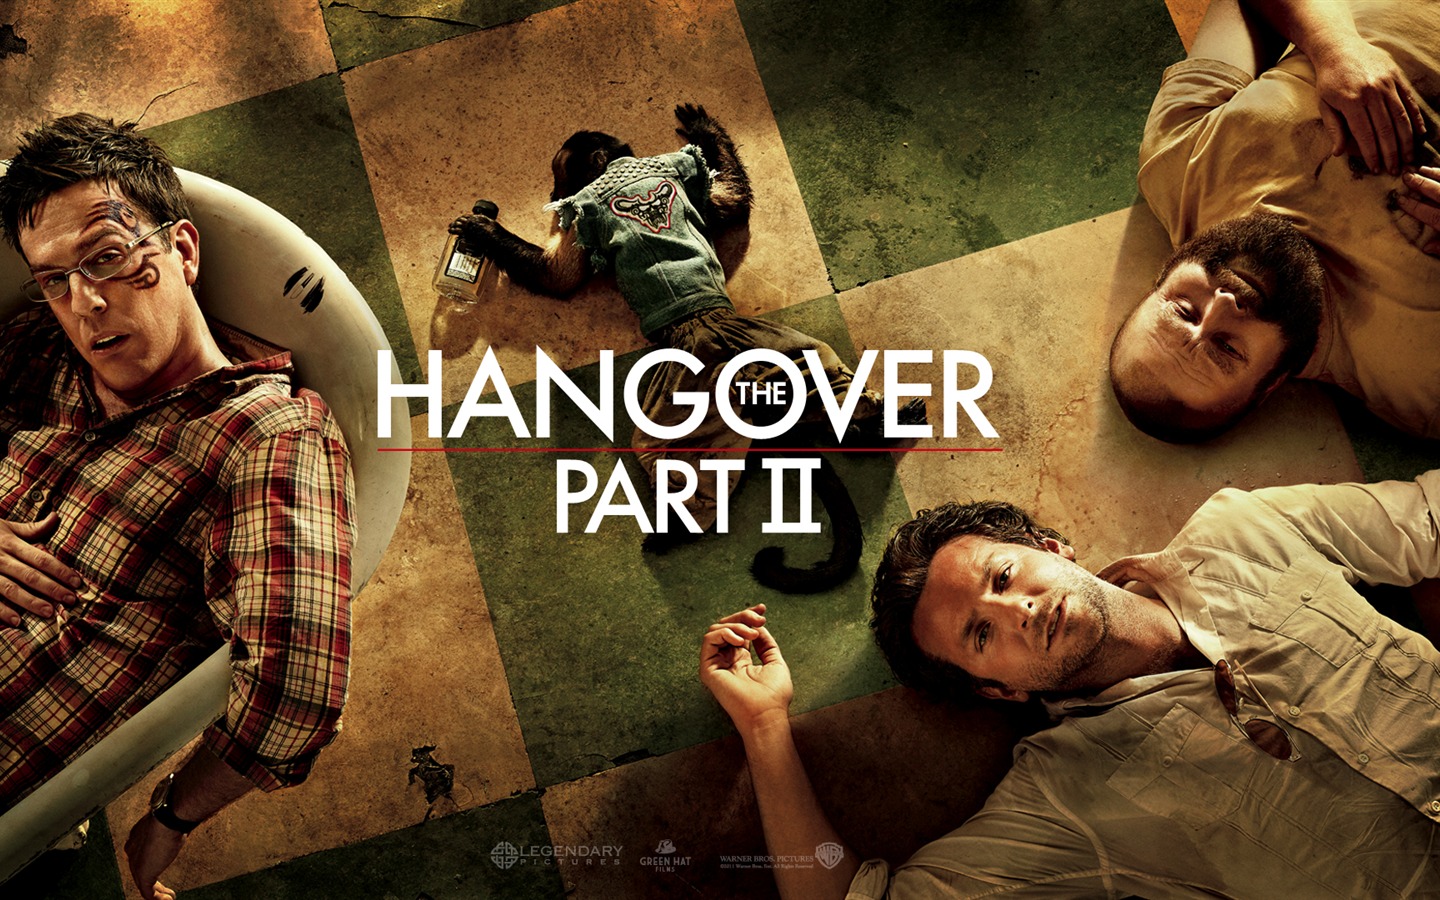 The Hangover část II tapety #1 - 1440x900